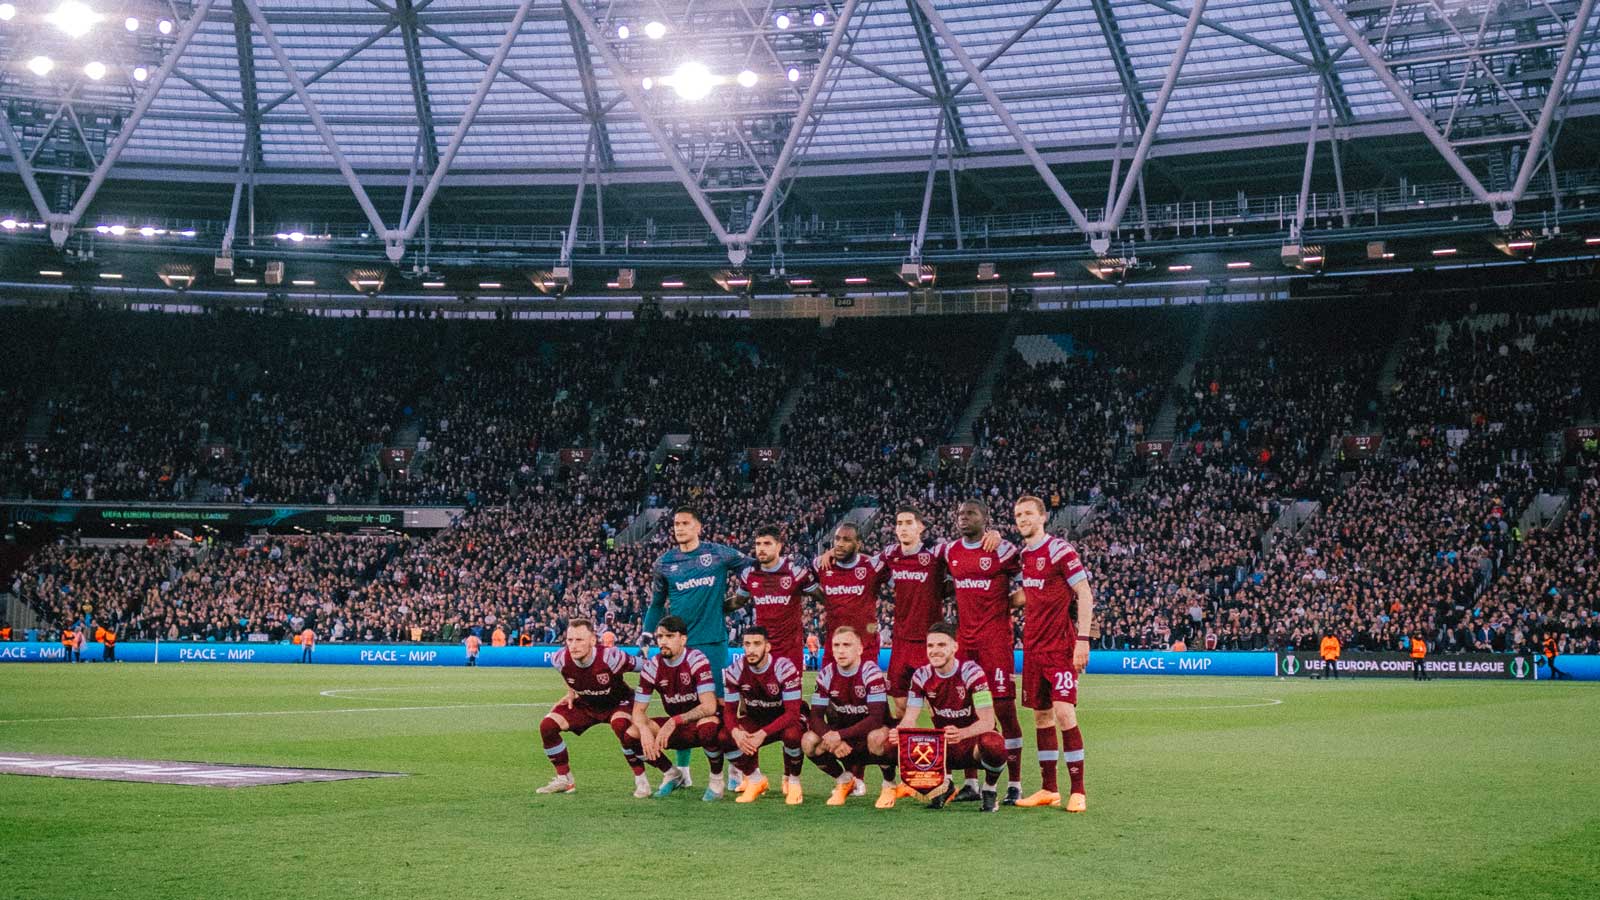 The Hammers line-up against Gent